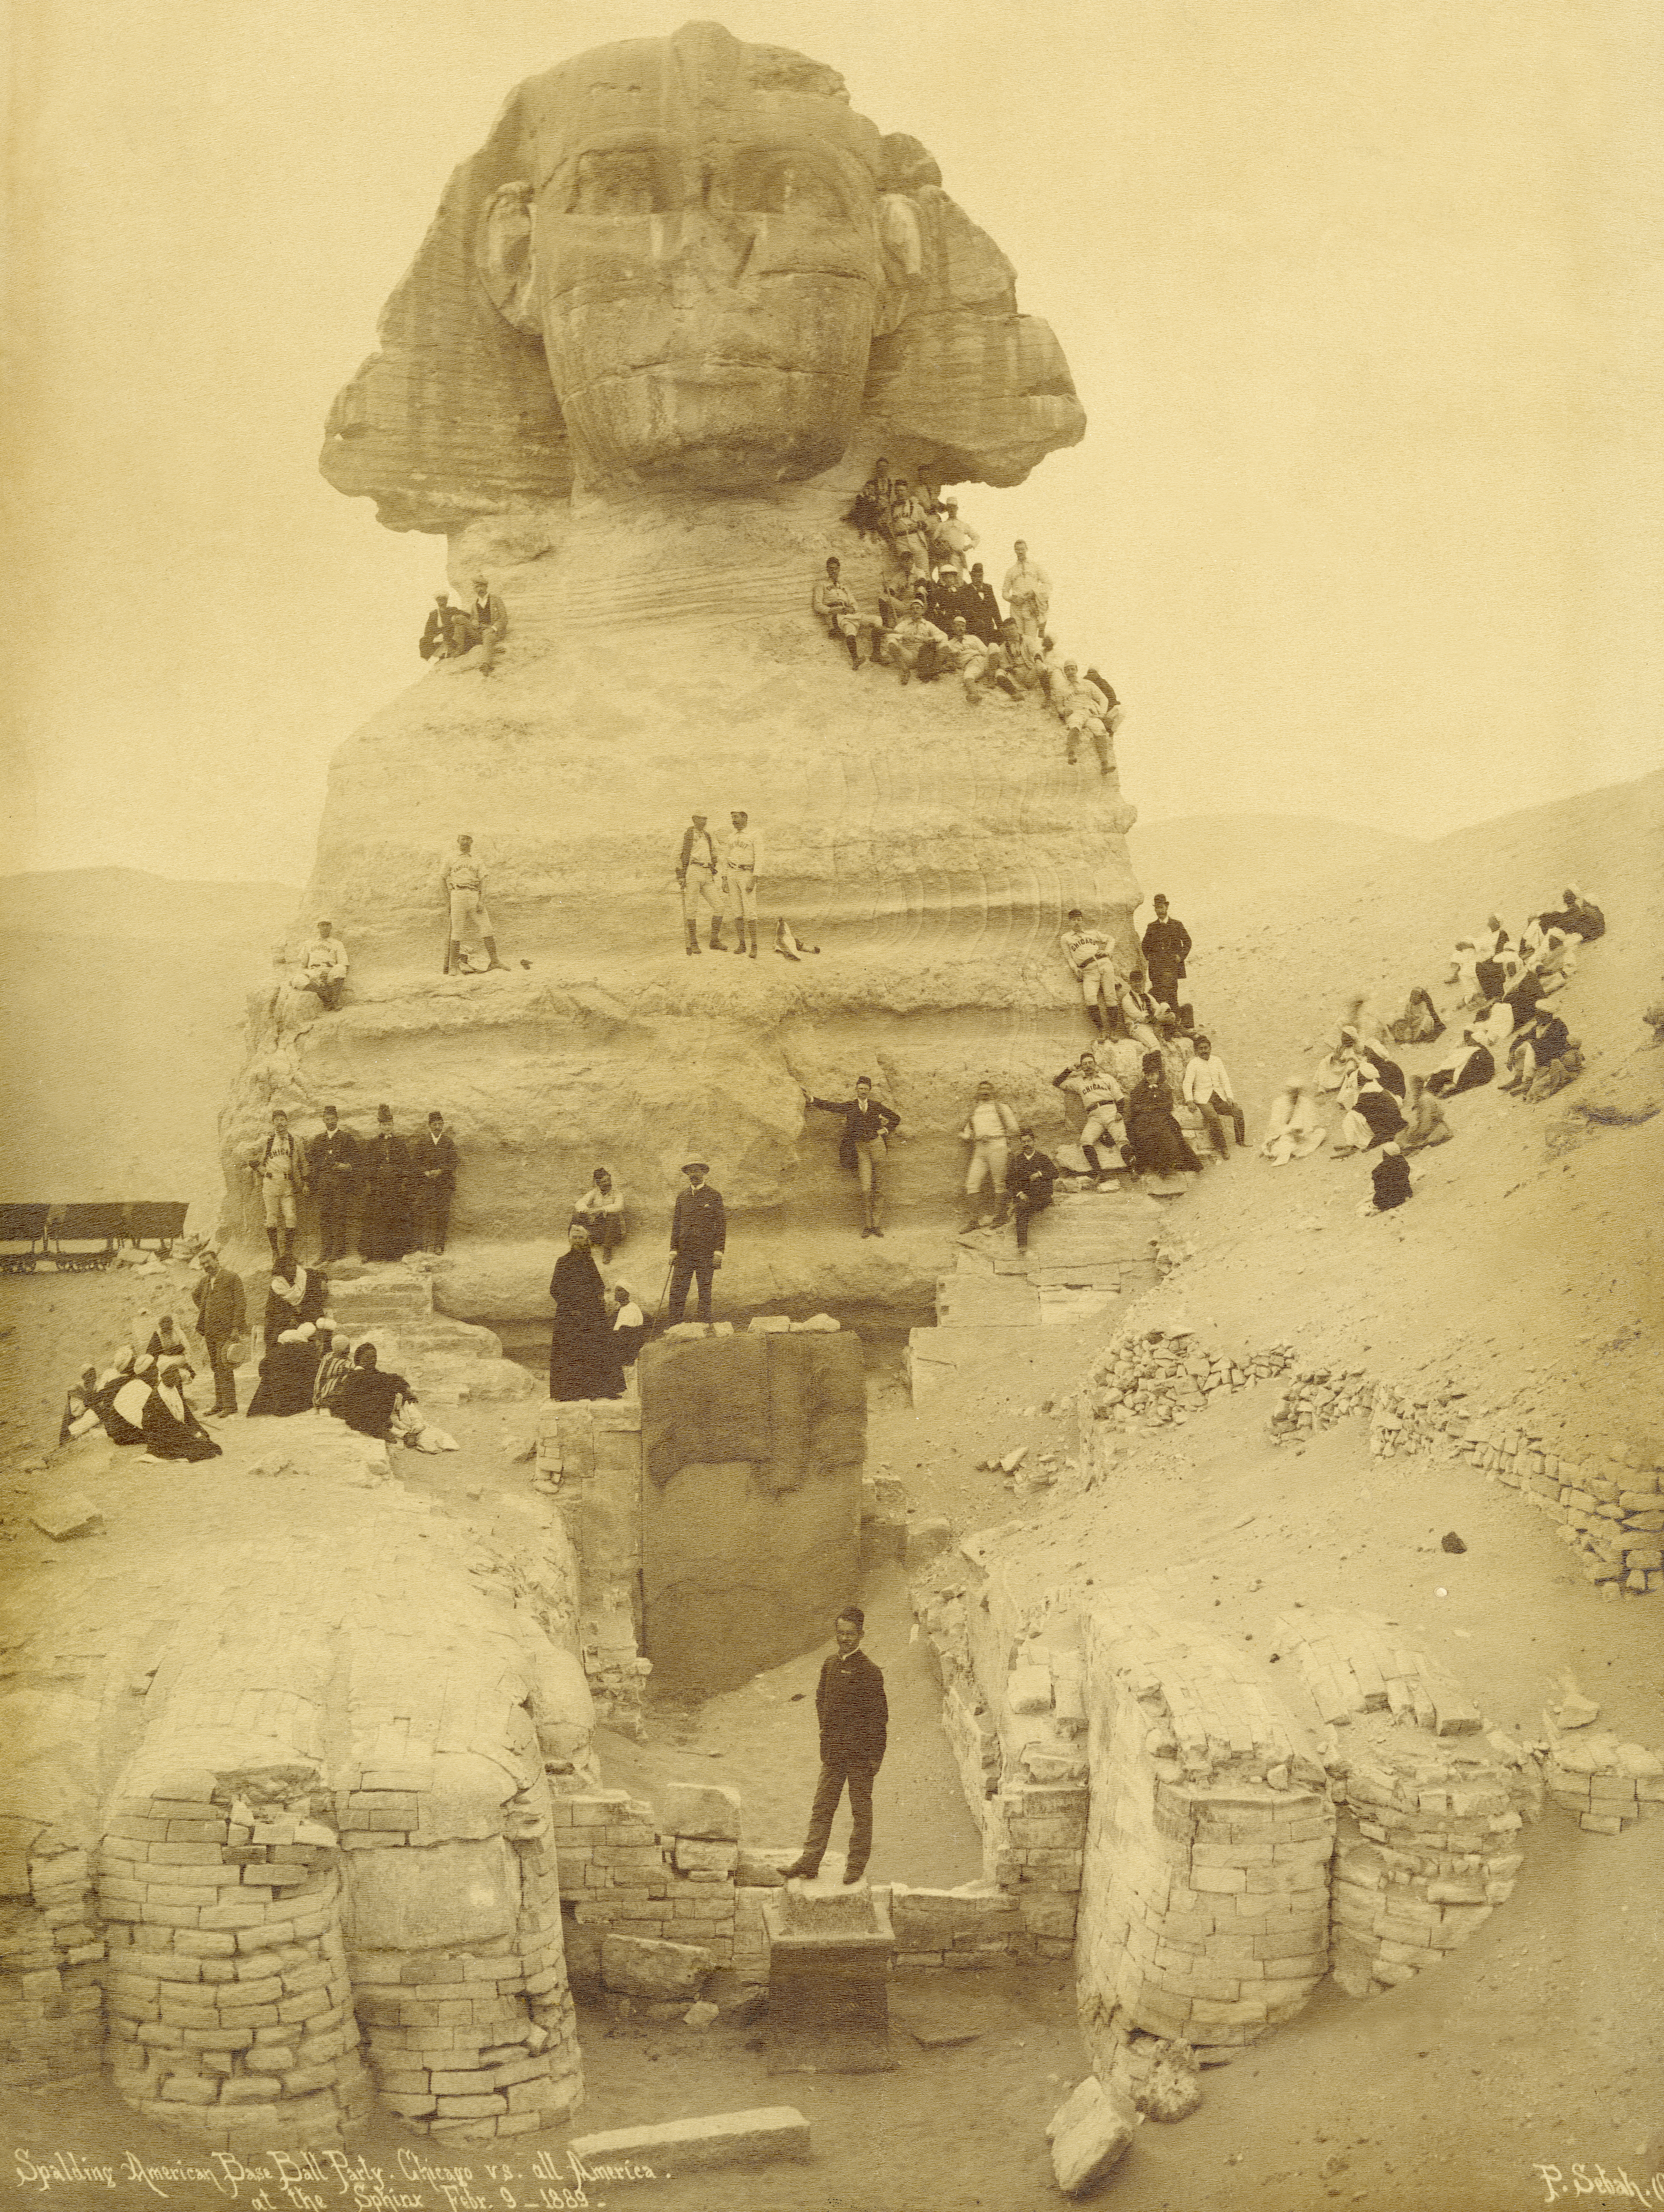 Visiting Egypt in the midst of their around-the-world ball-playing exhibition, tour organizers and baseball players climb the Sphinx for a photo, Feb. 9, 1889.